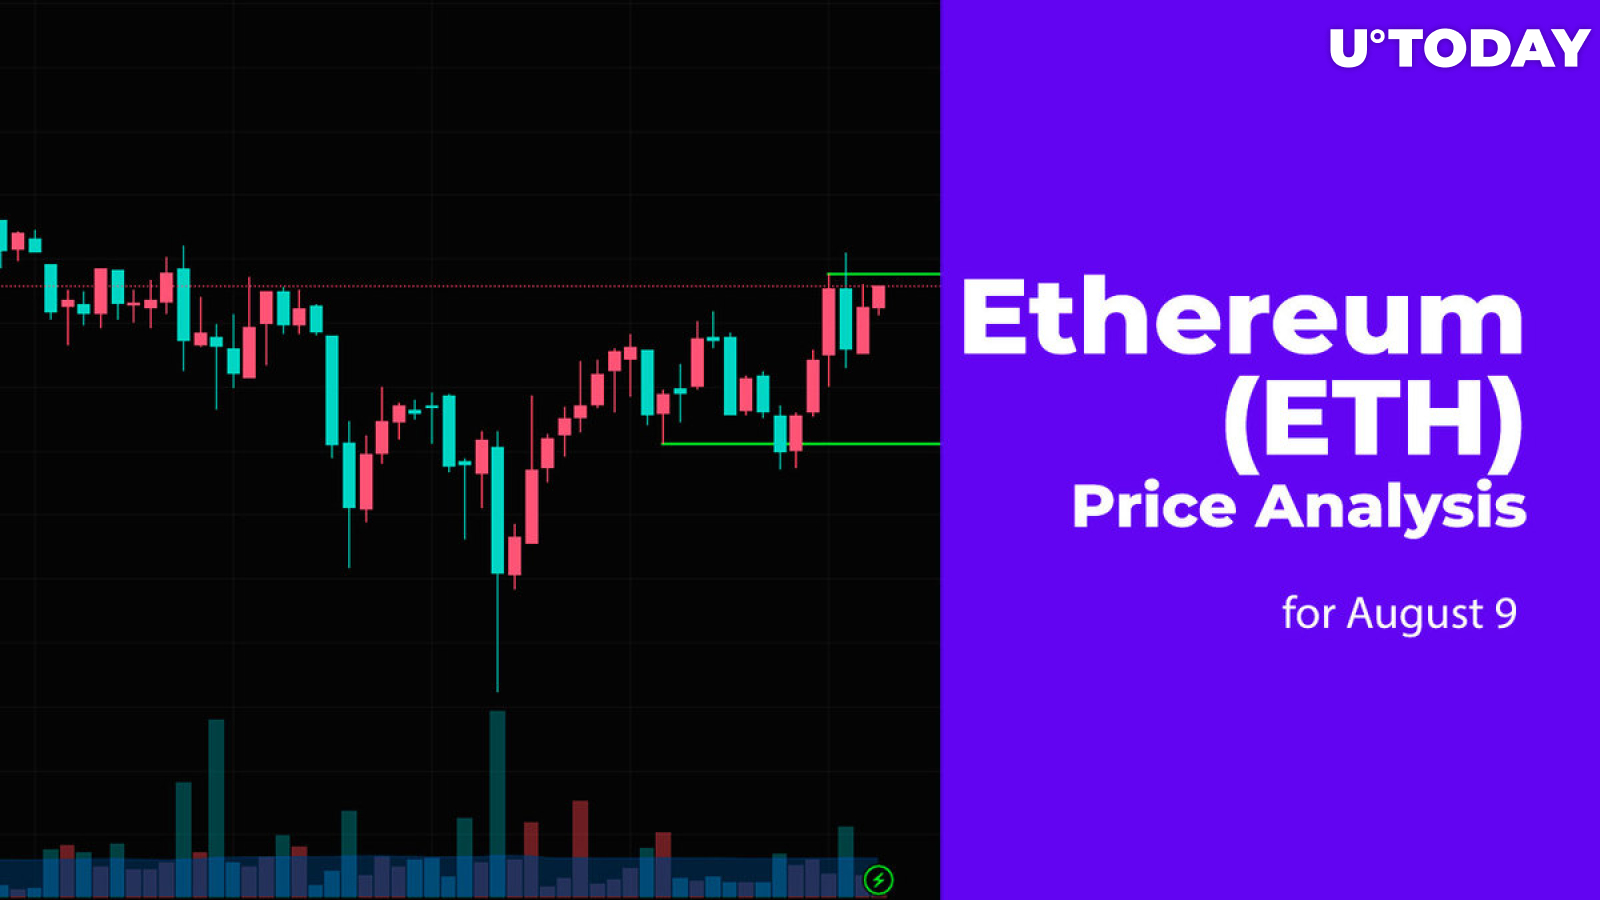 Ethereum (ETH) Price Analysis for August 9